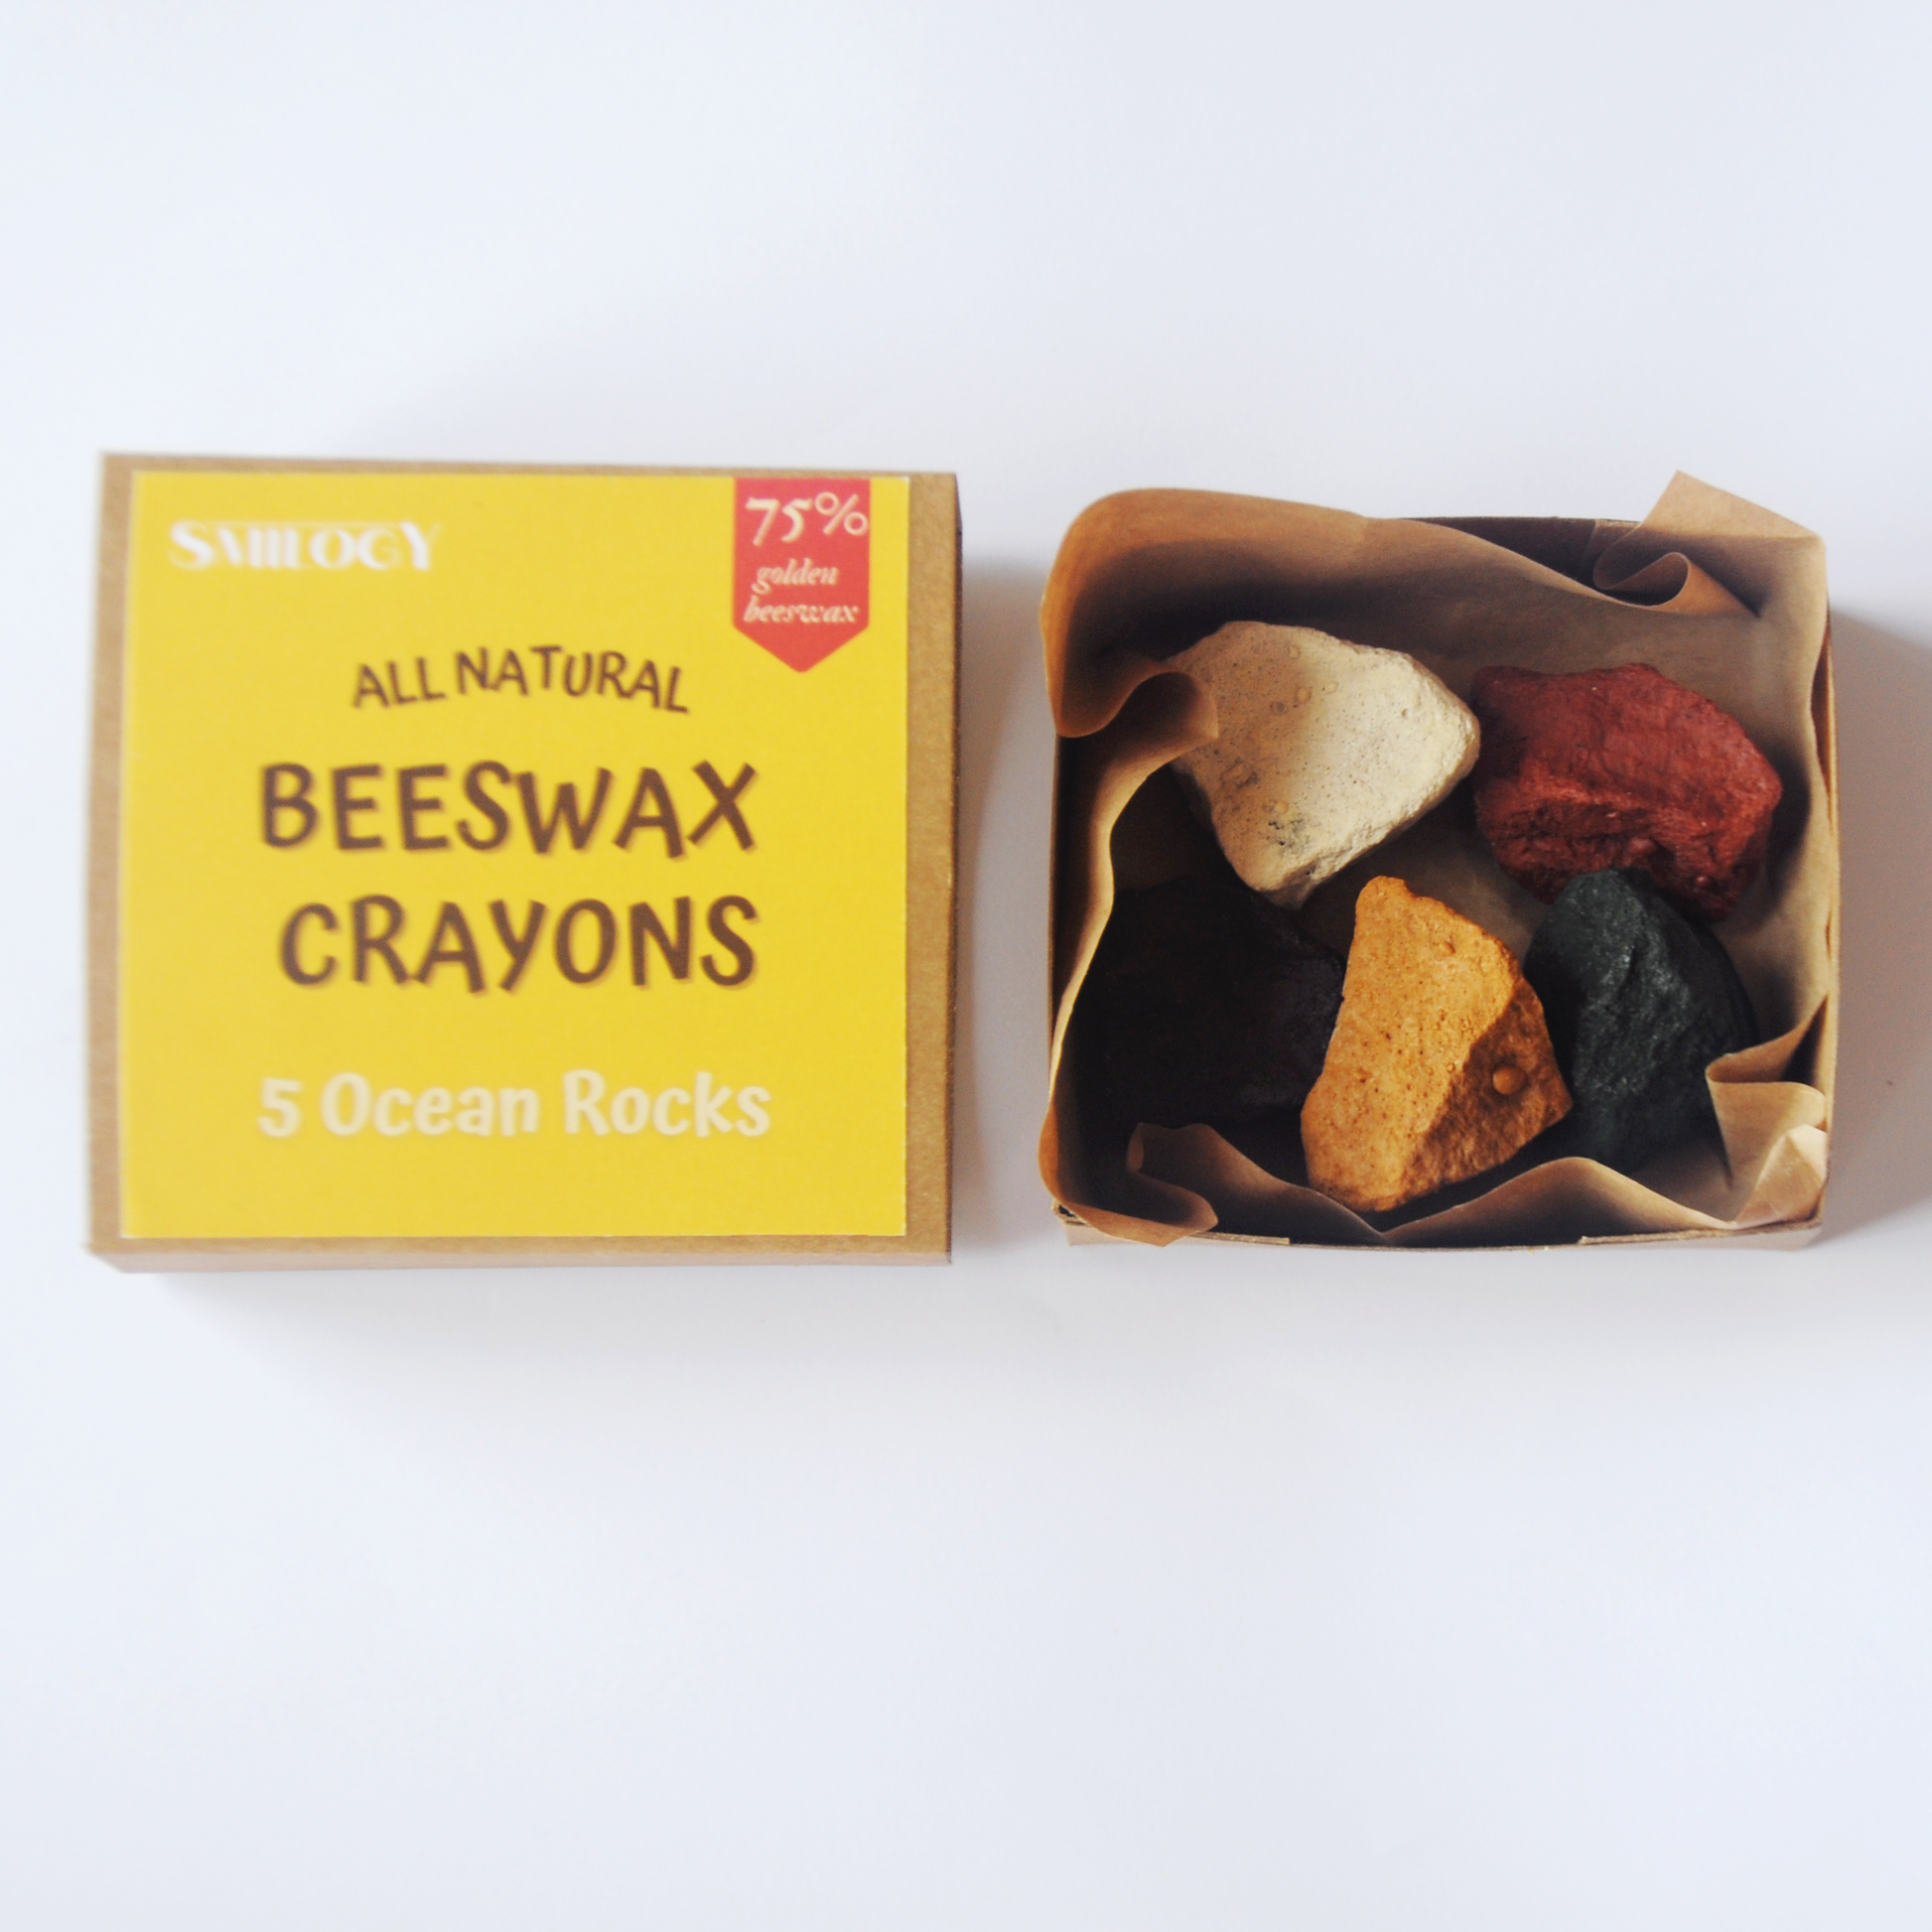 ALL NATURAL BEESWAX ROCK CRAYONS open box next to the full cover